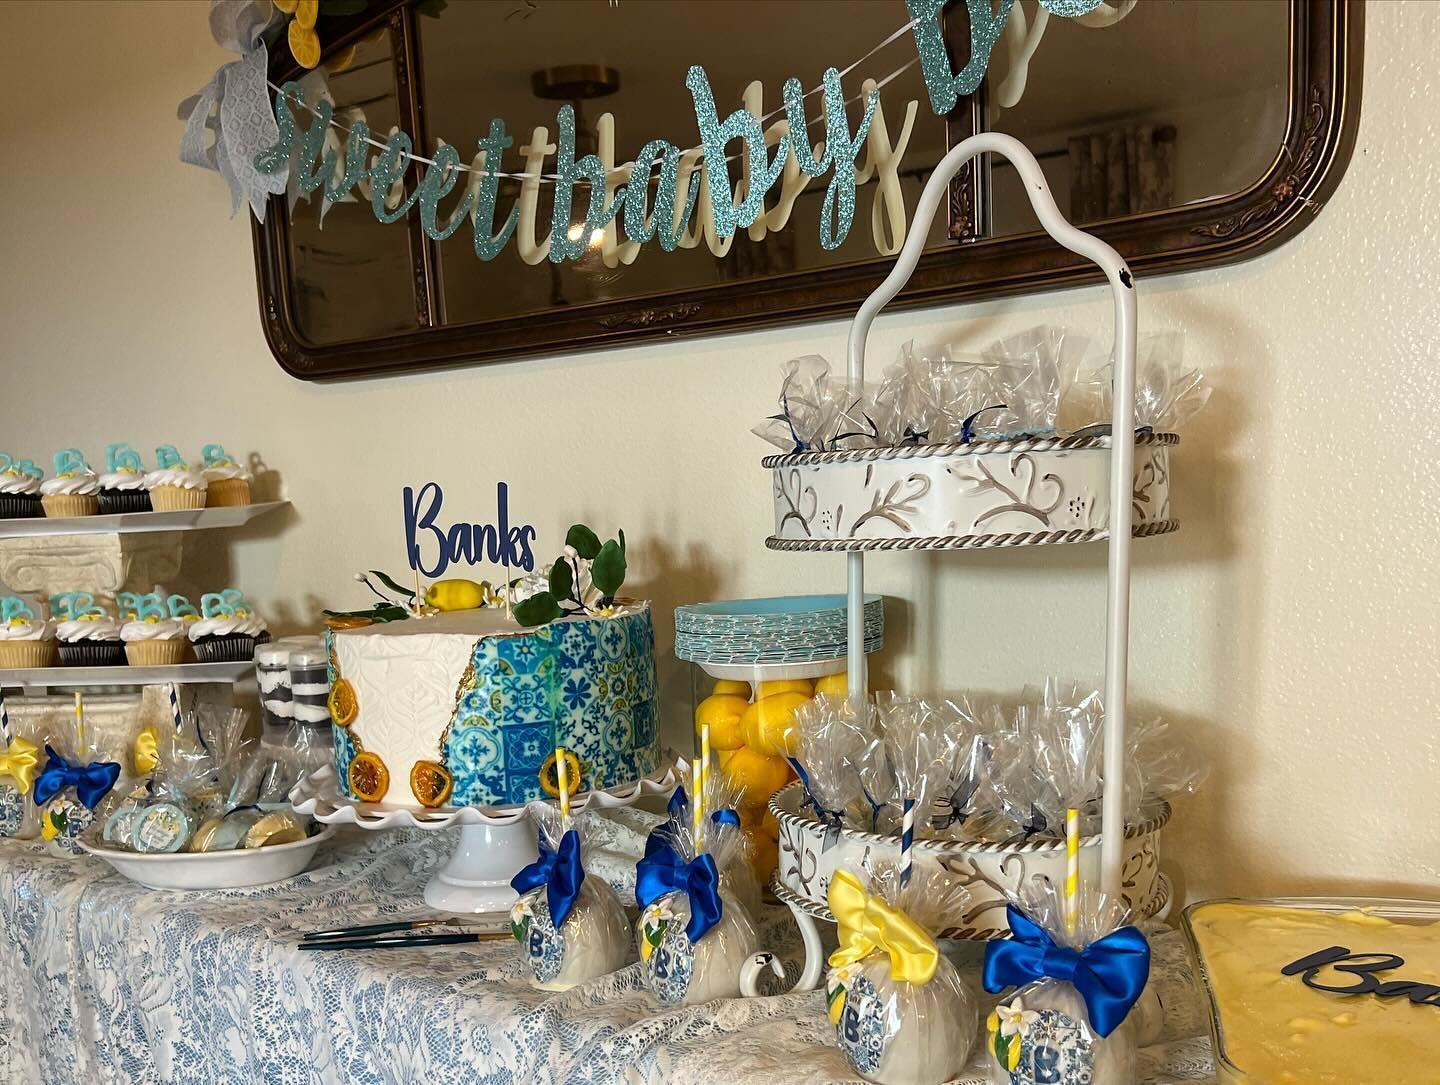 Have I told you all what a big, beautiful family I have that makes everything special? Today was a family baby shower, and everything was their typical family-style, Pinterest, Etsy-style perfection. Balloon arches, swimming, laughter, Taco Man, cupc